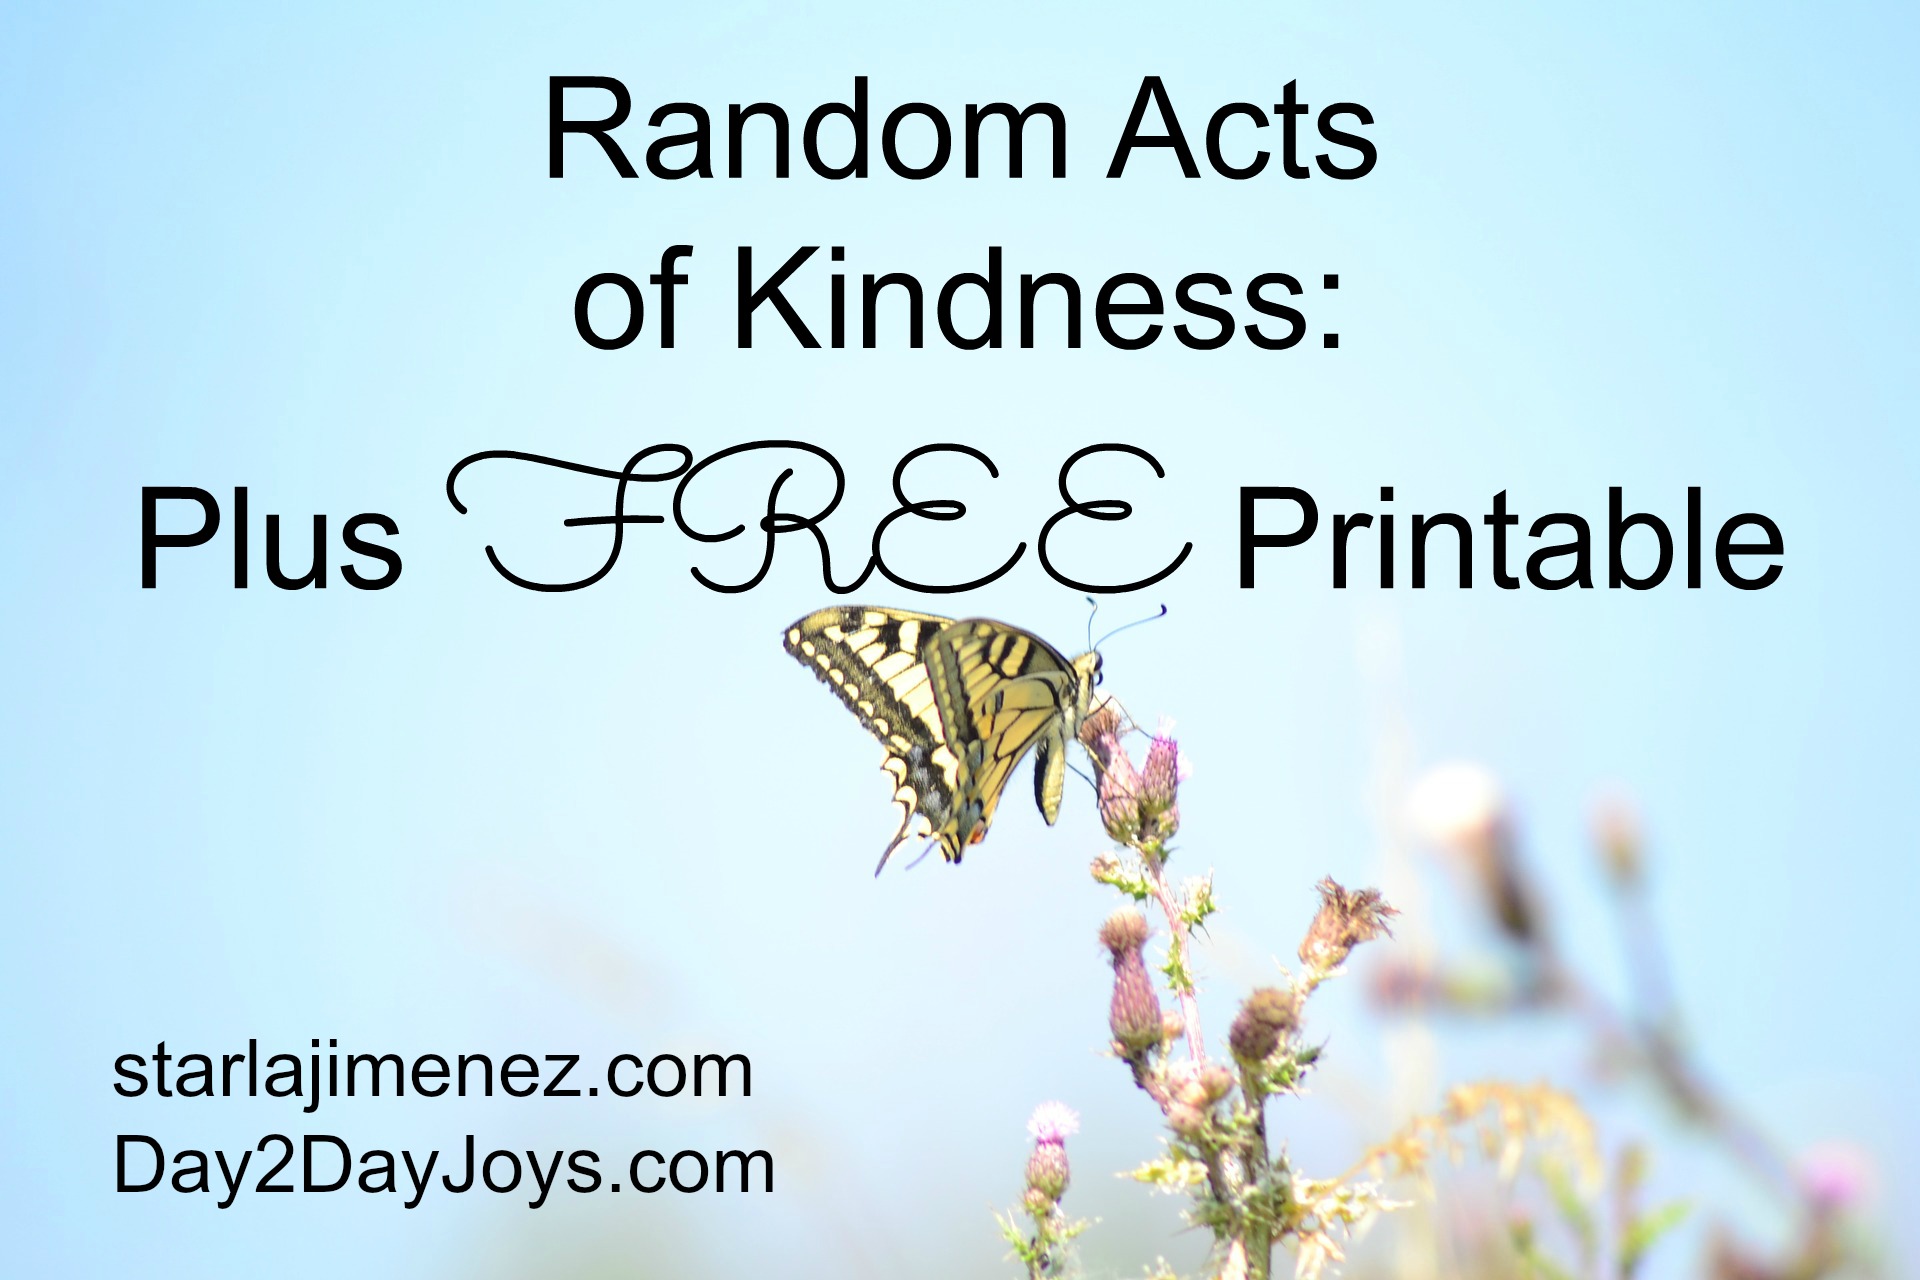 If you show kindness an animal it. Random Acts of Kindness. An Act of Kindness. Act of Kindness Ирис. Do a Random Act of Kindness.